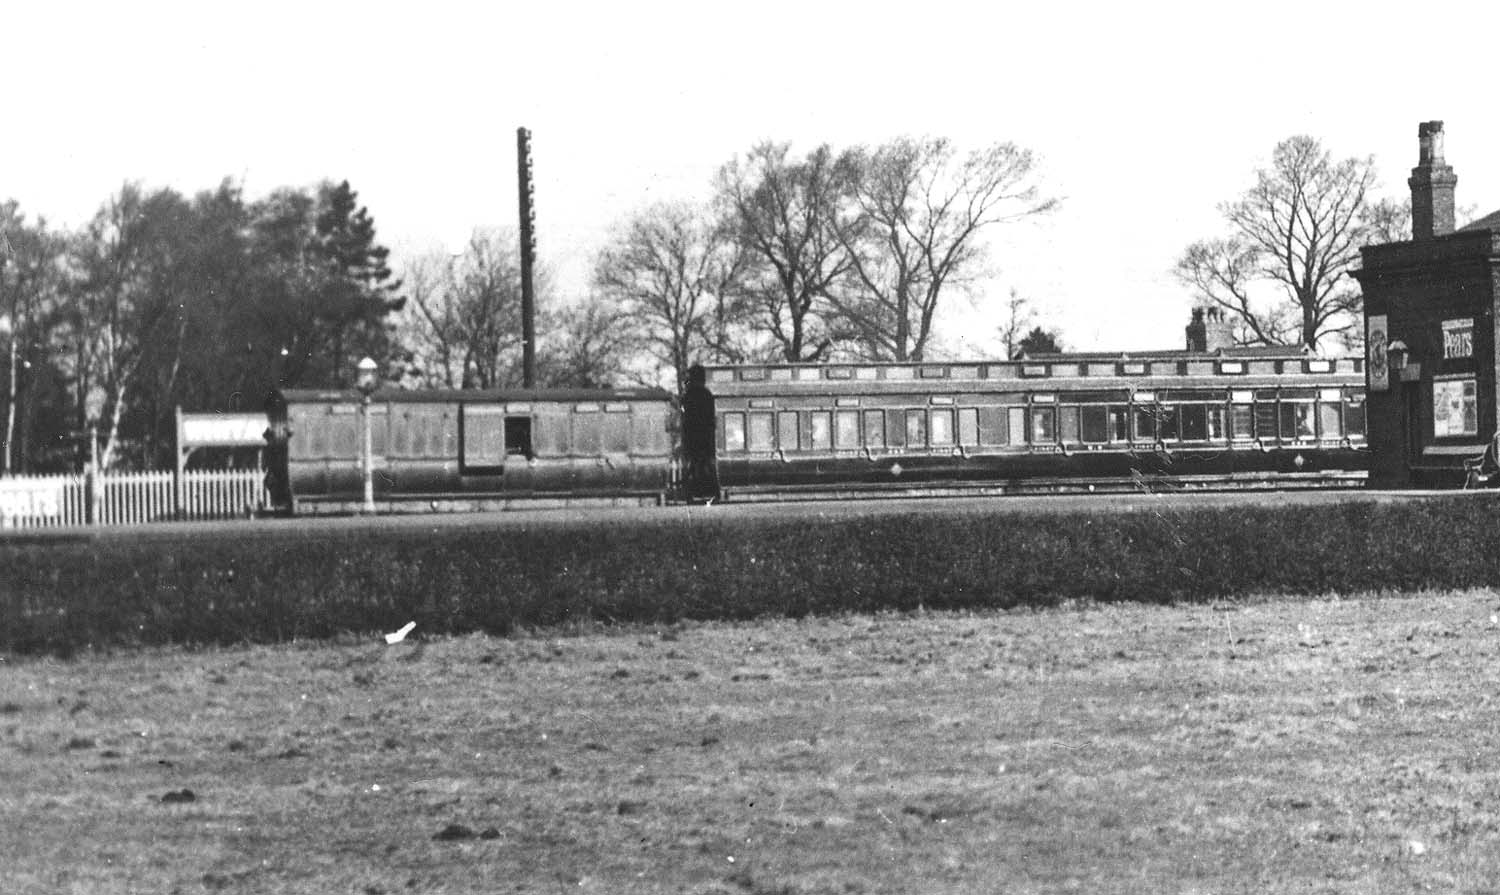 Close up showing the rear two carriages of an express train to either Tamworth or to Leicester via Nuneaton